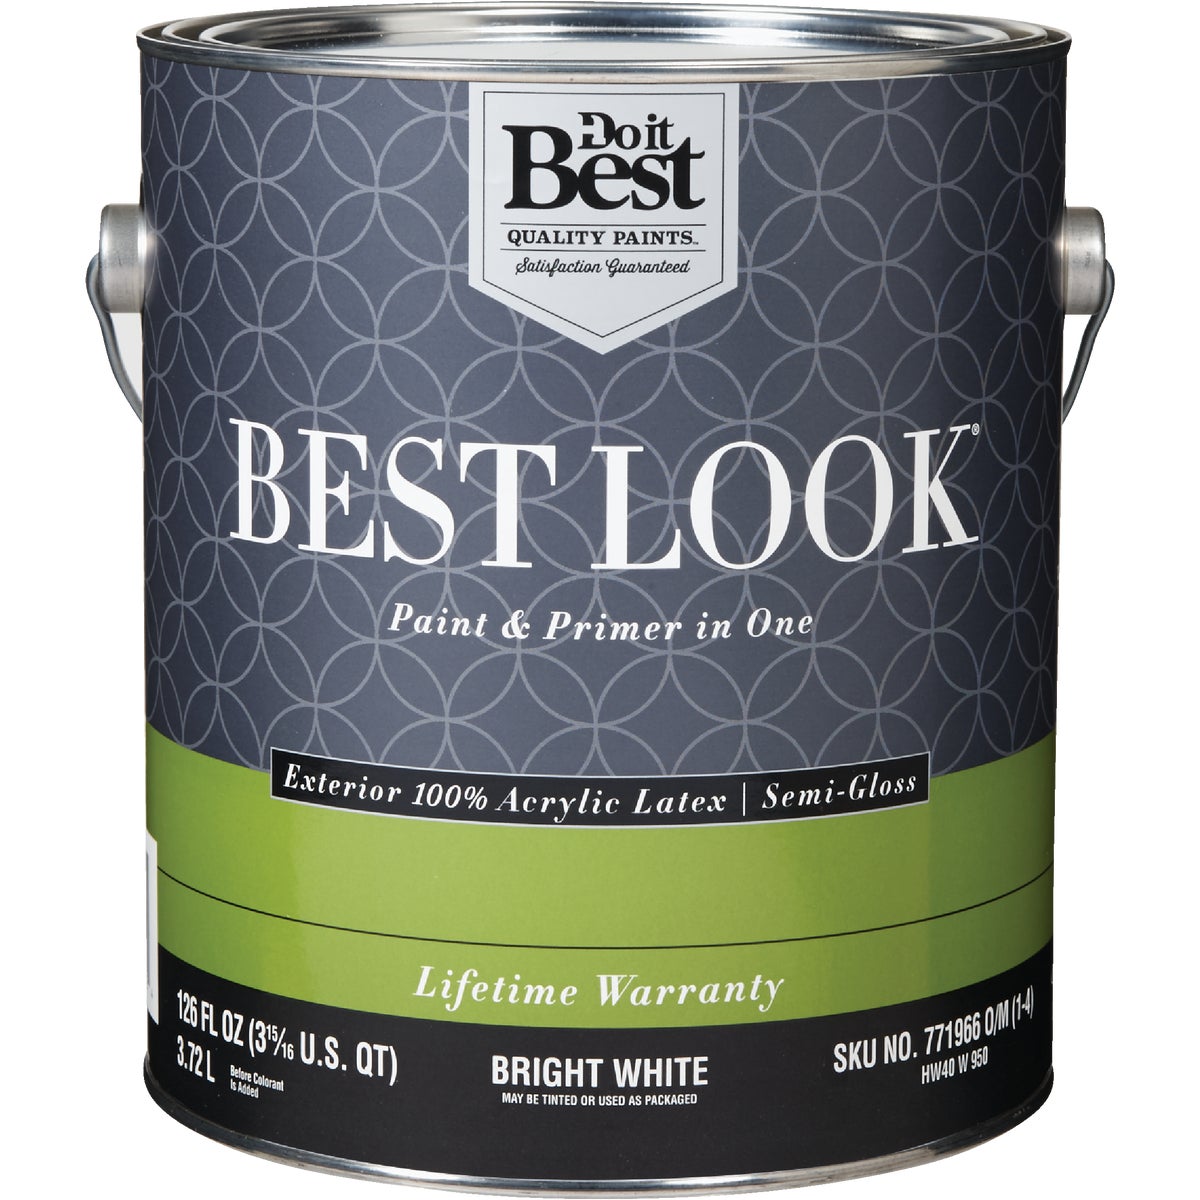 Best Look 100% Acrylic Latex Premium Paint & Primer In One Semi-Gloss Exterior House Paint, Bright White, 1 Gal.